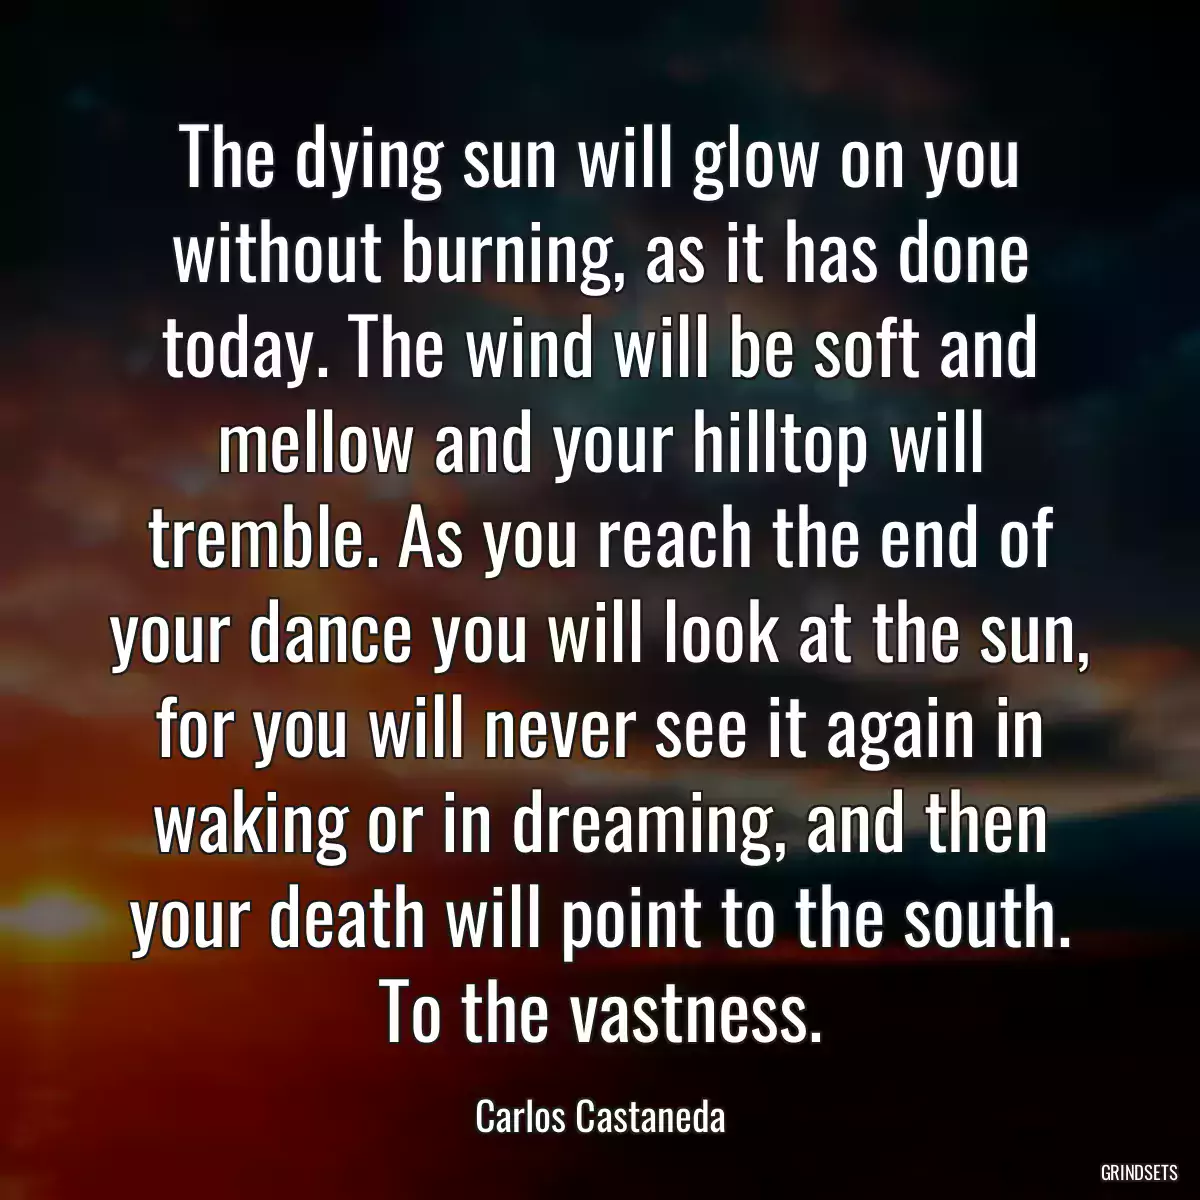 The dying sun will glow on you without burning, as it has done today. The wind will be soft and mellow and your hilltop will tremble. As you reach the end of your dance you will look at the sun, for you will never see it again in waking or in dreaming, and then your death will point to the south. To the vastness.